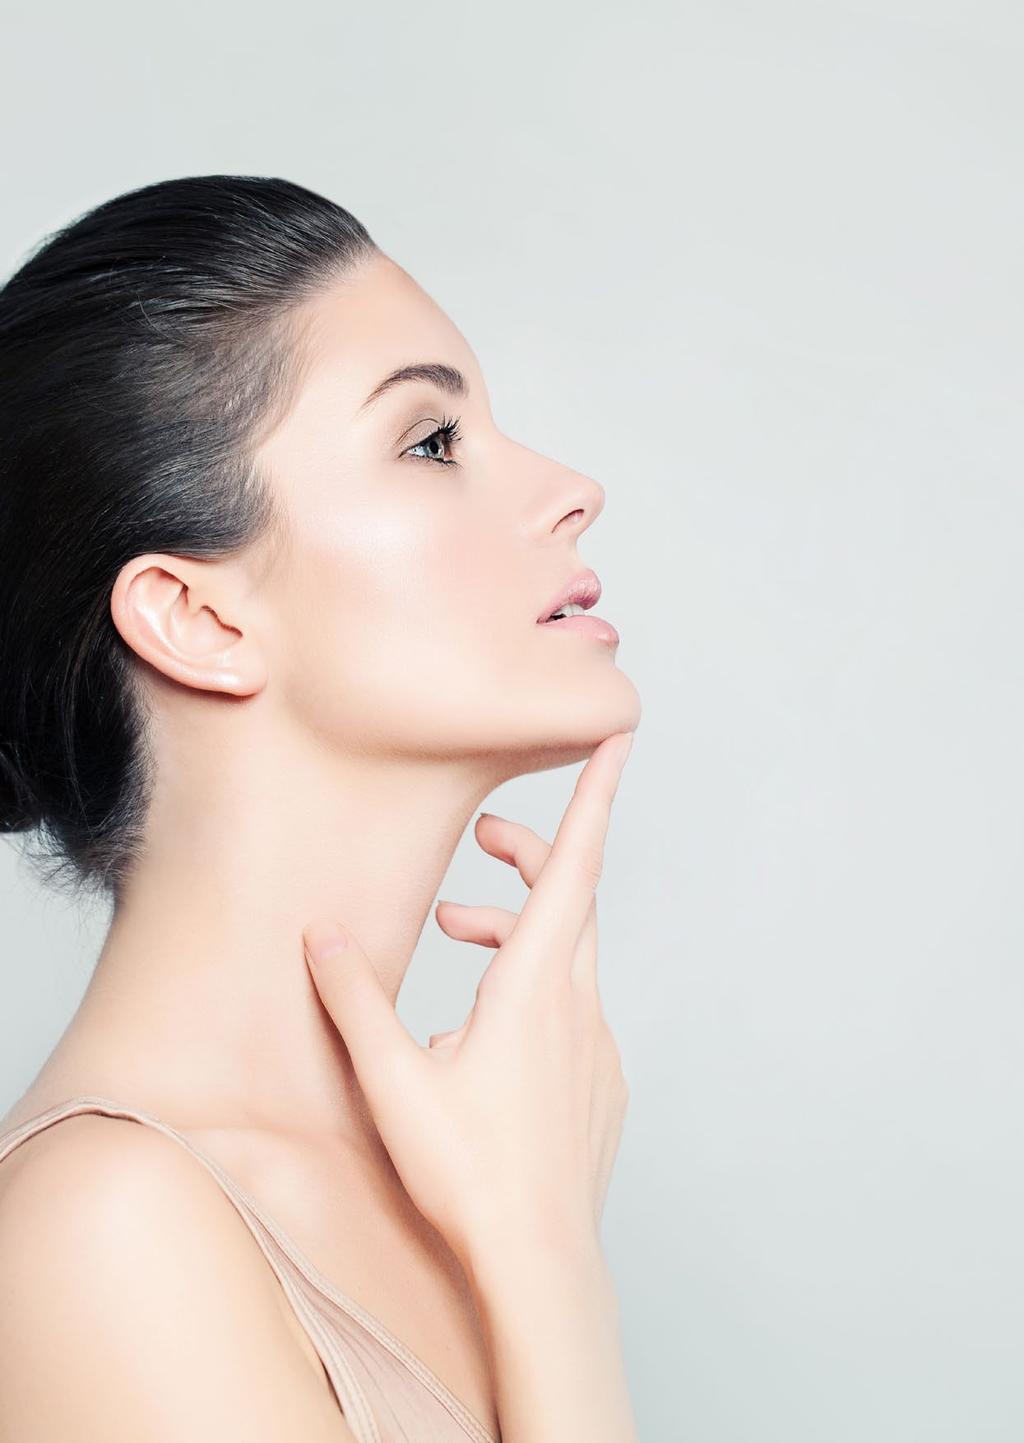 What is the cost of laser mole removal?